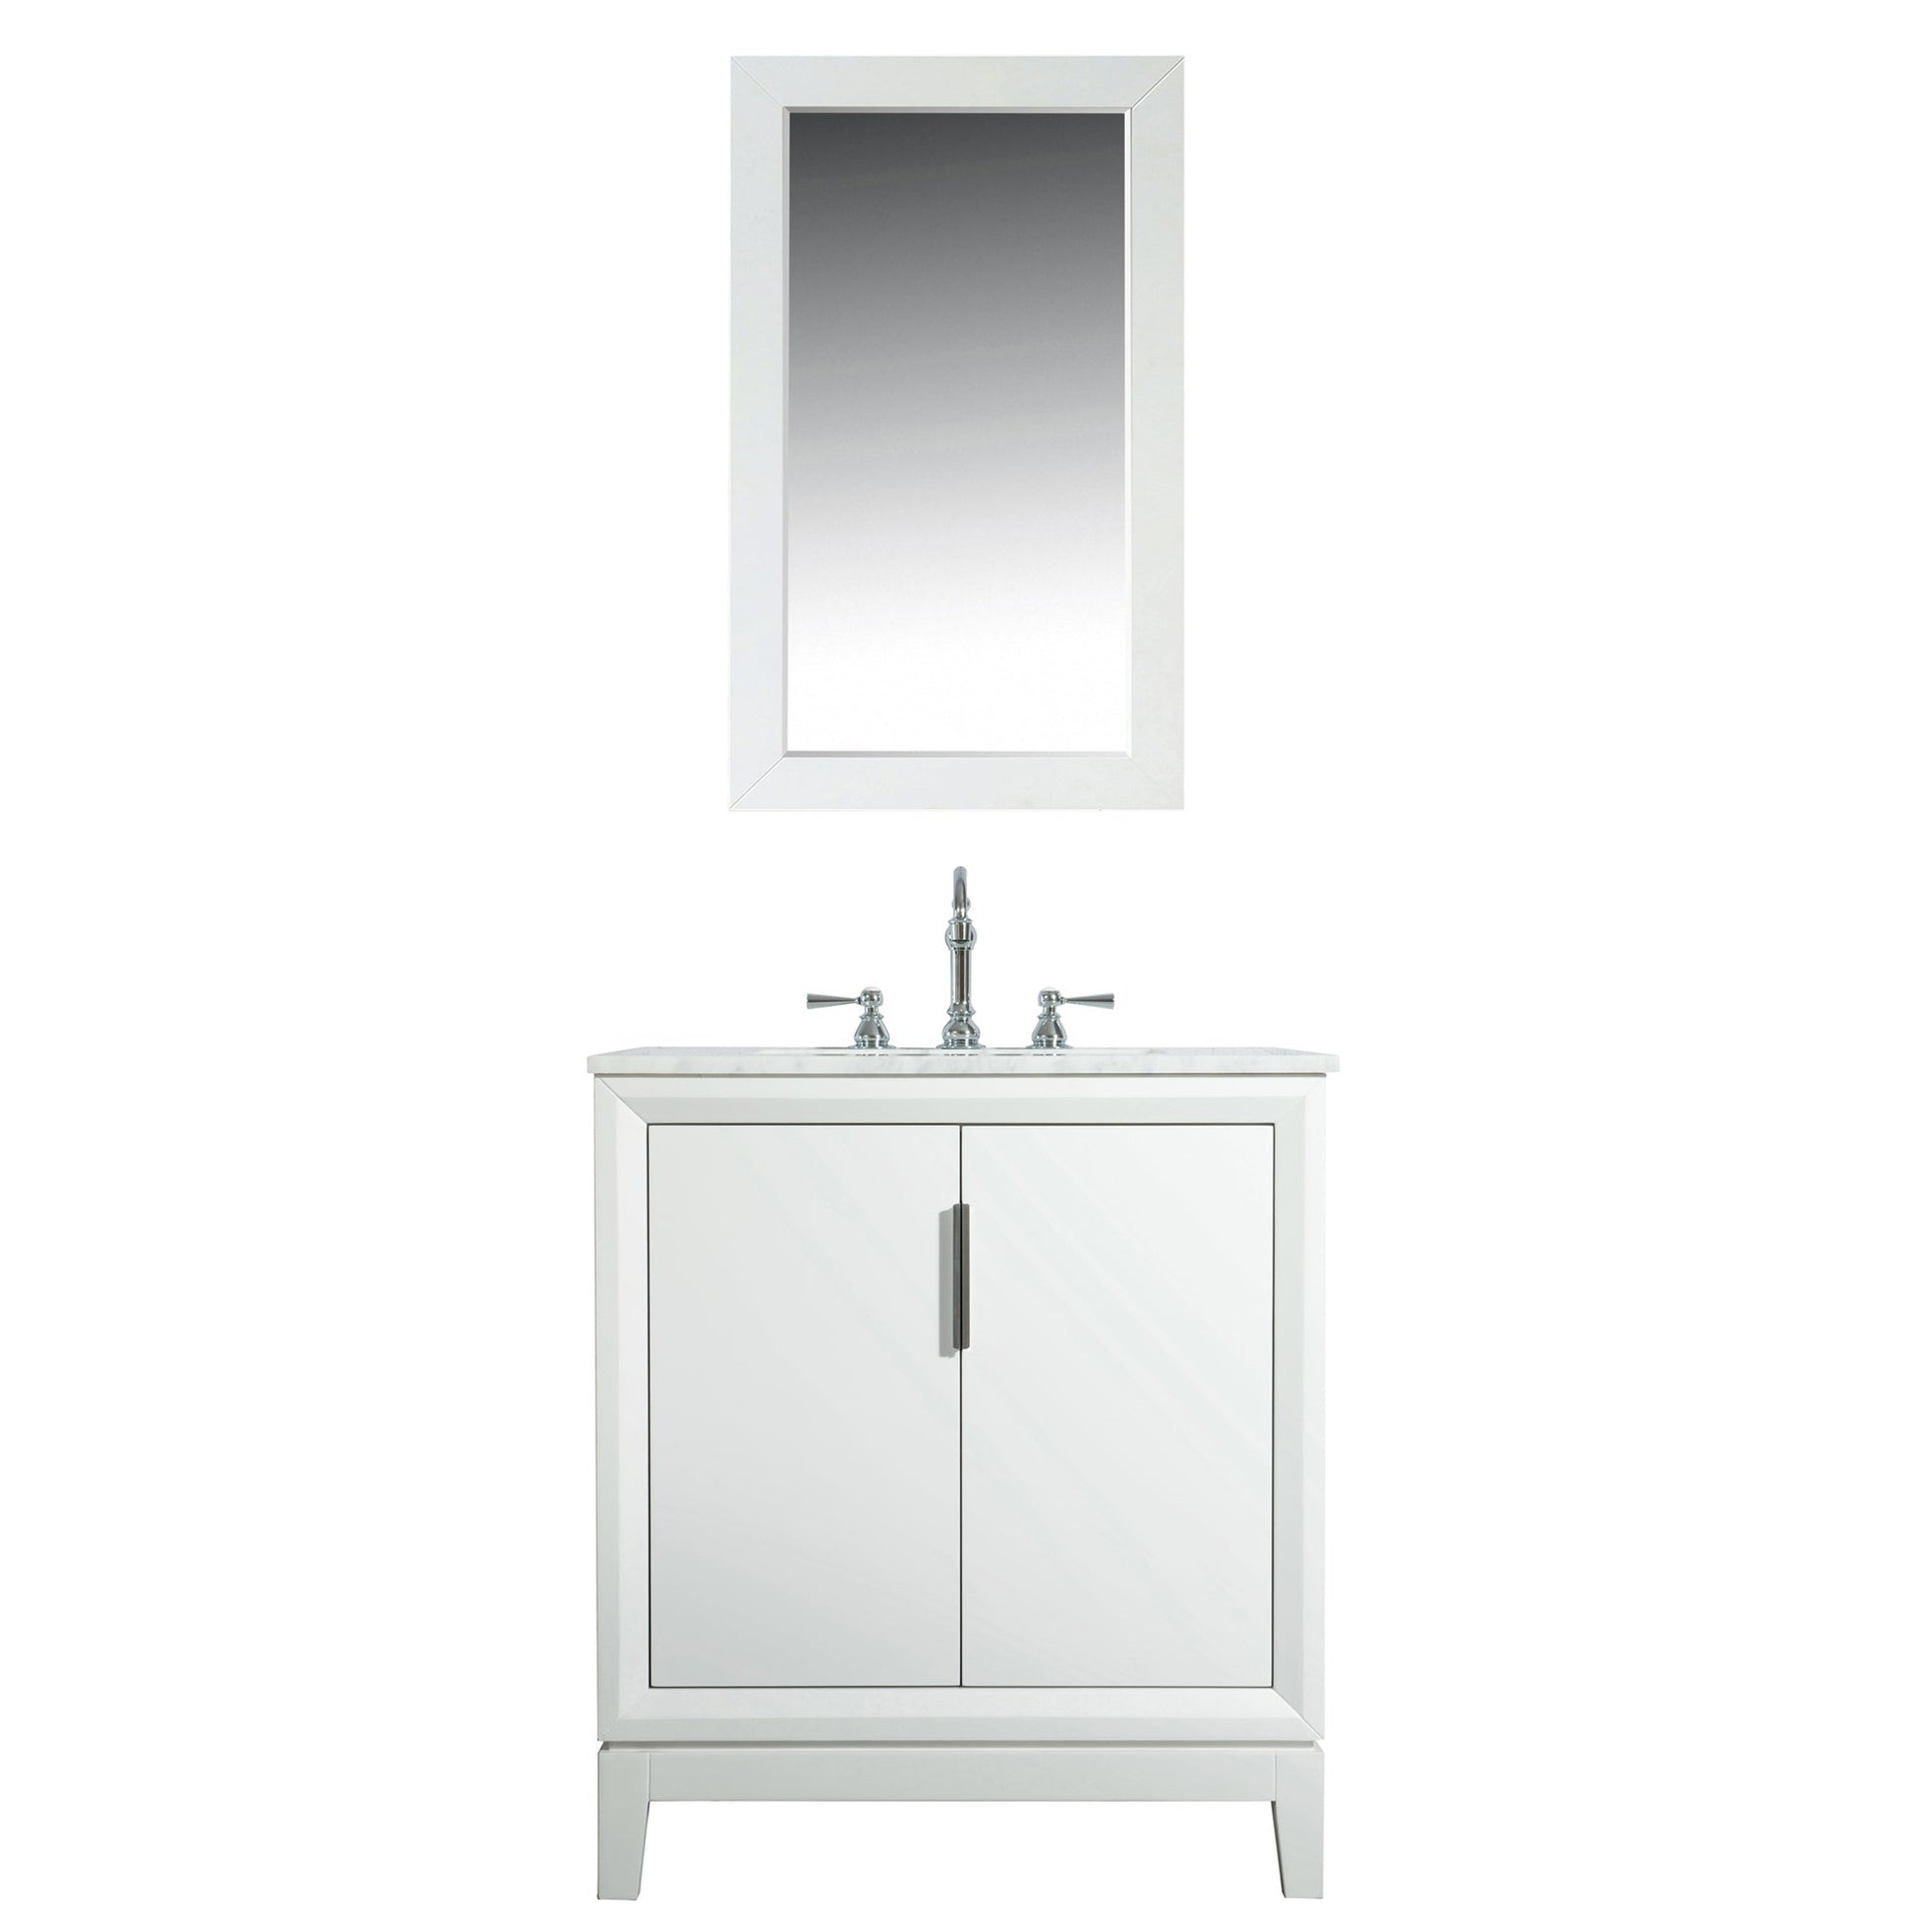 Water Creation Elizabeth 30" Single Sink Carrara White Marble Vanity In Pure White With Matching Mirror and F2-0012-01-TL Lavatory Faucet